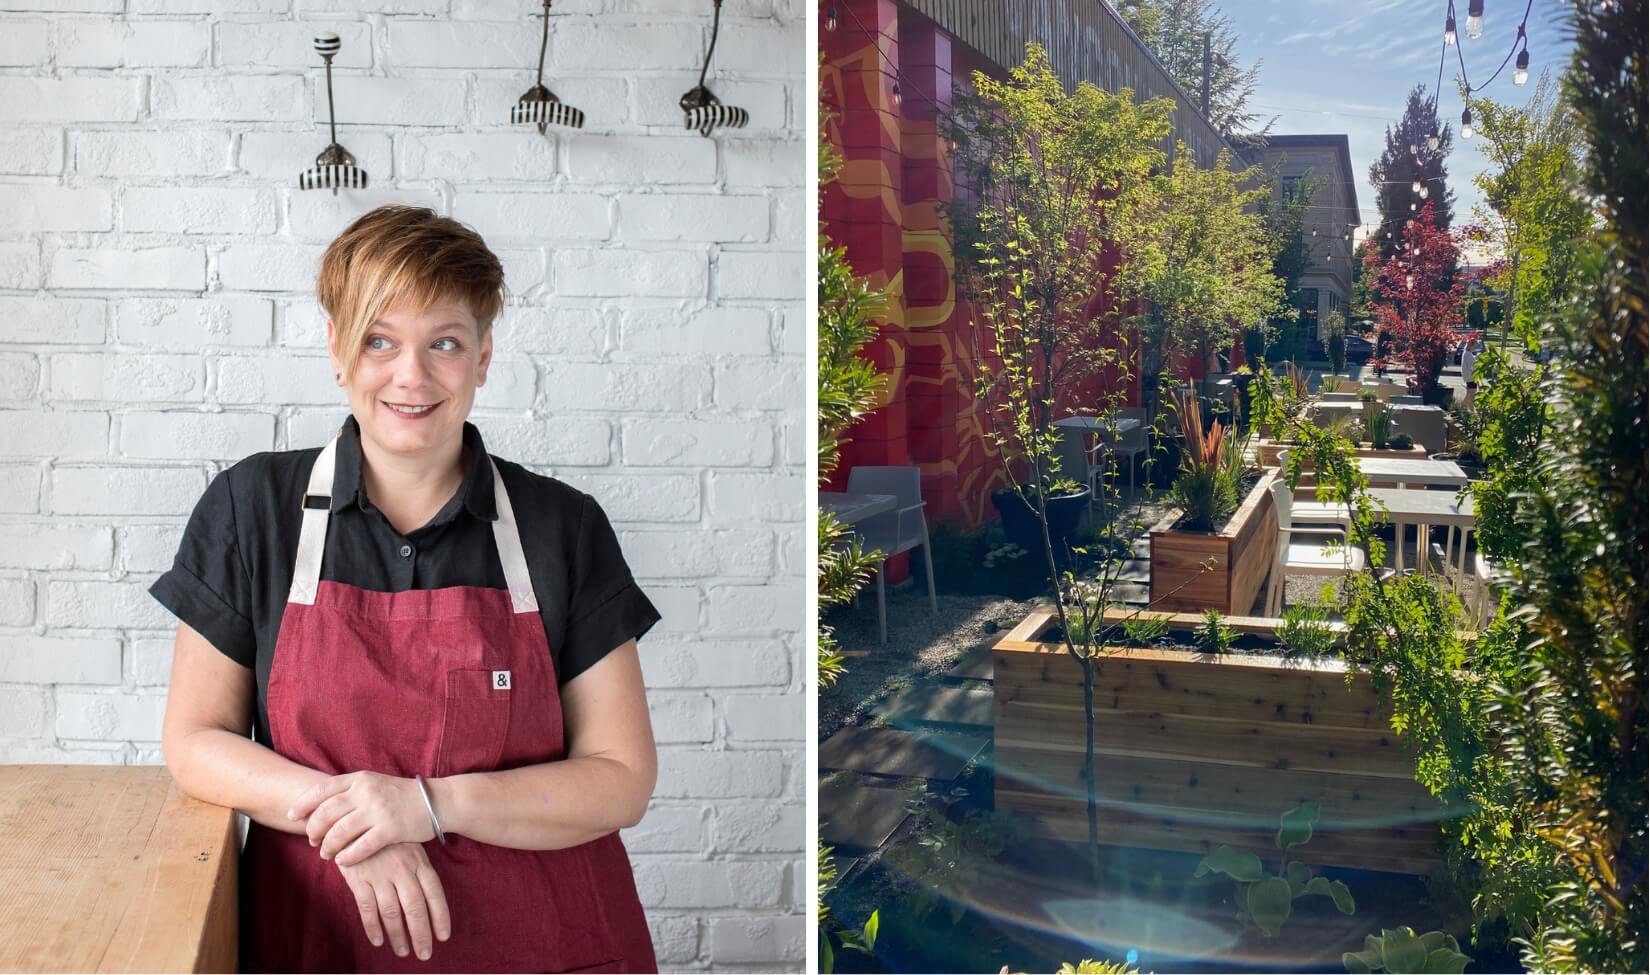 Left: A woman, Andrea Carlson, smiles in a red apron in front of a white brick wall. Right: A restaurant patio in the daytime with greenery and string lights.